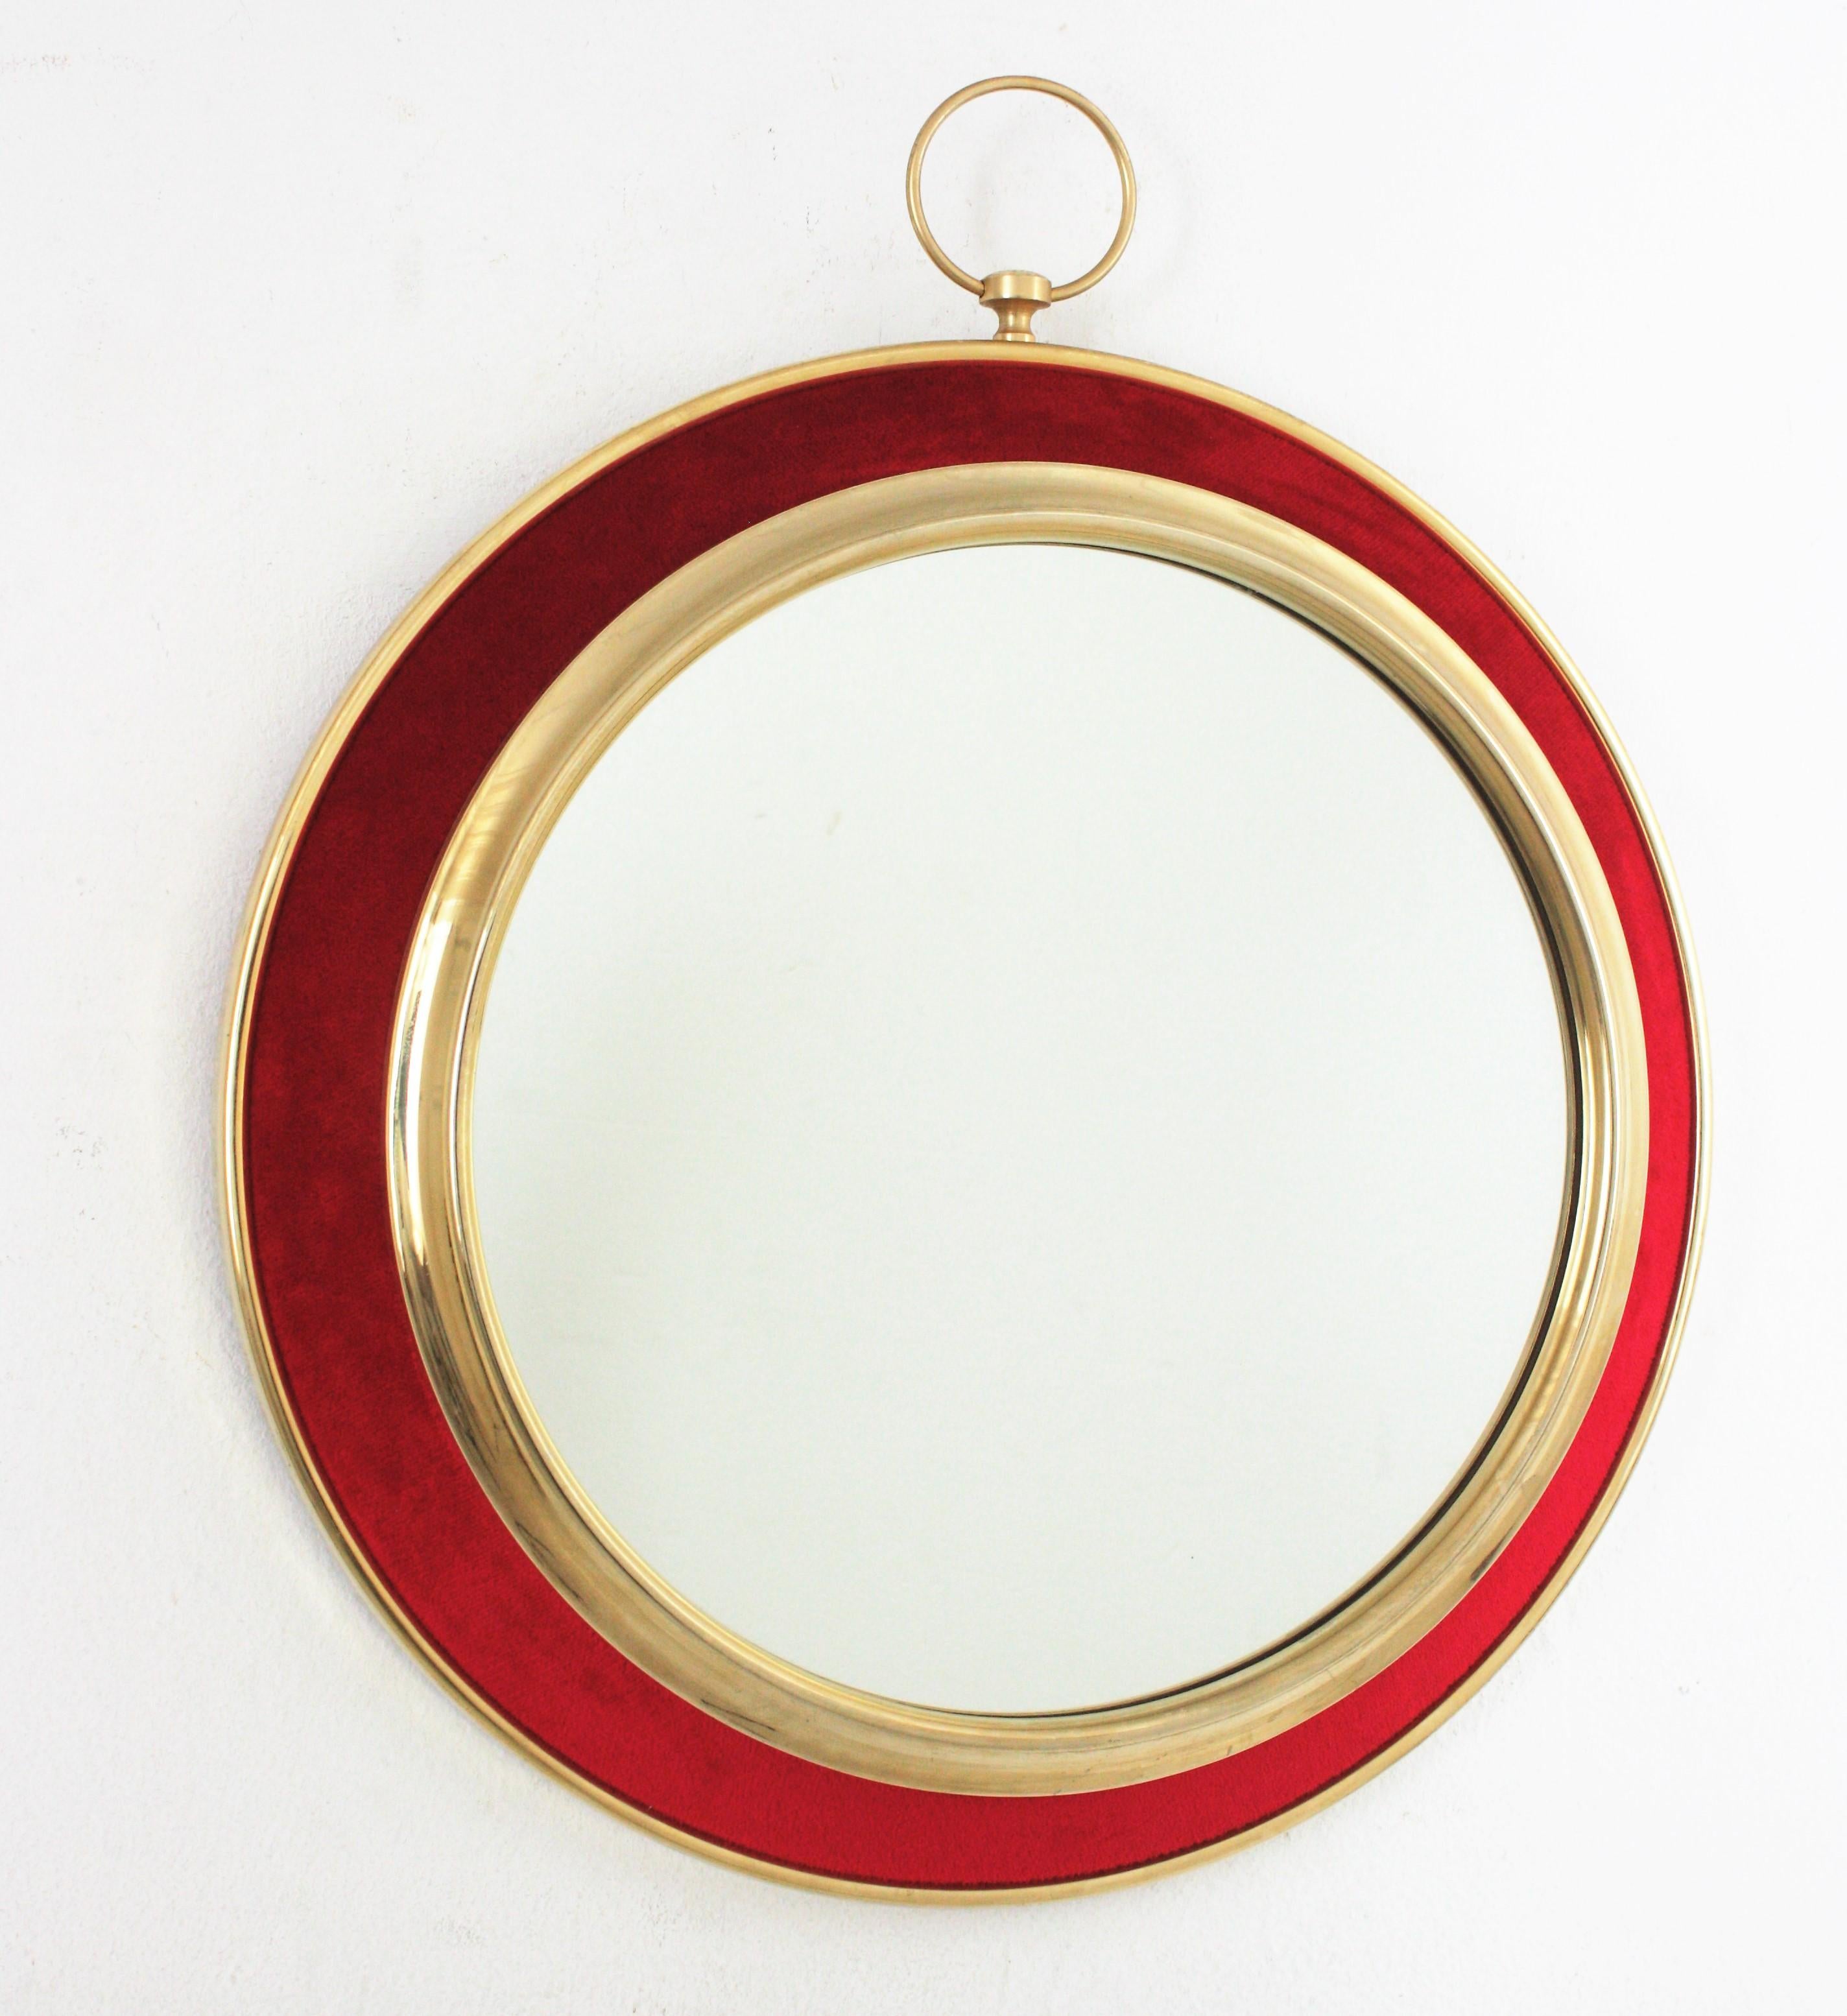 Red Velvet and Brass Pocket Watch Shaped Wall Mirror, Spain, 1950s-1960s
Eye-catching brass pocket watch shaped wall mirror in the style of Piero Fornasetti, his design has not lost its impact since the 1940s.
Nicely constructed and vibrant